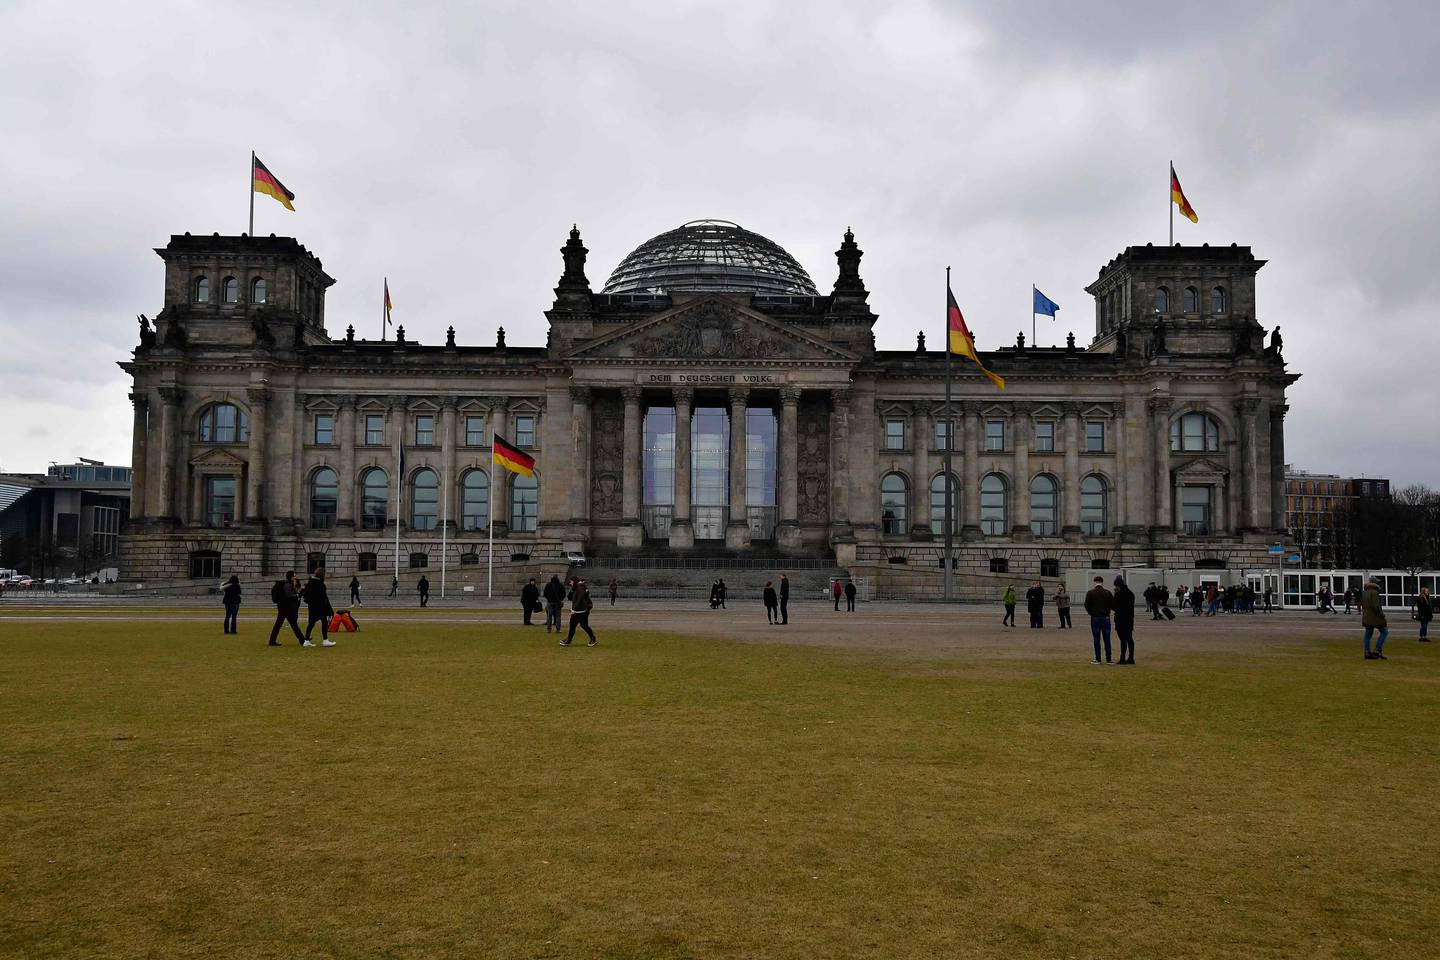 The Reichstag housing the Bundestag (lower house of parliament) is pictured on March 14, 2018 in Berlin, as the new German government was sworn in here.
German Chancellor Angela Merkel, bruised by half a year of post-election coalition haggling, was narrowly confirmed by parliament to her fourth and likely final term at the helm of Europe's biggest economy. Lawmakers in Berlin's glass-domed Reichstag voted 364-315 with nine abstentions for Merkel, who was then formally appointed by President Frank-Walter Steinmeier before taking the oath of office. / AFP PHOTO / Tobias SCHWARZ